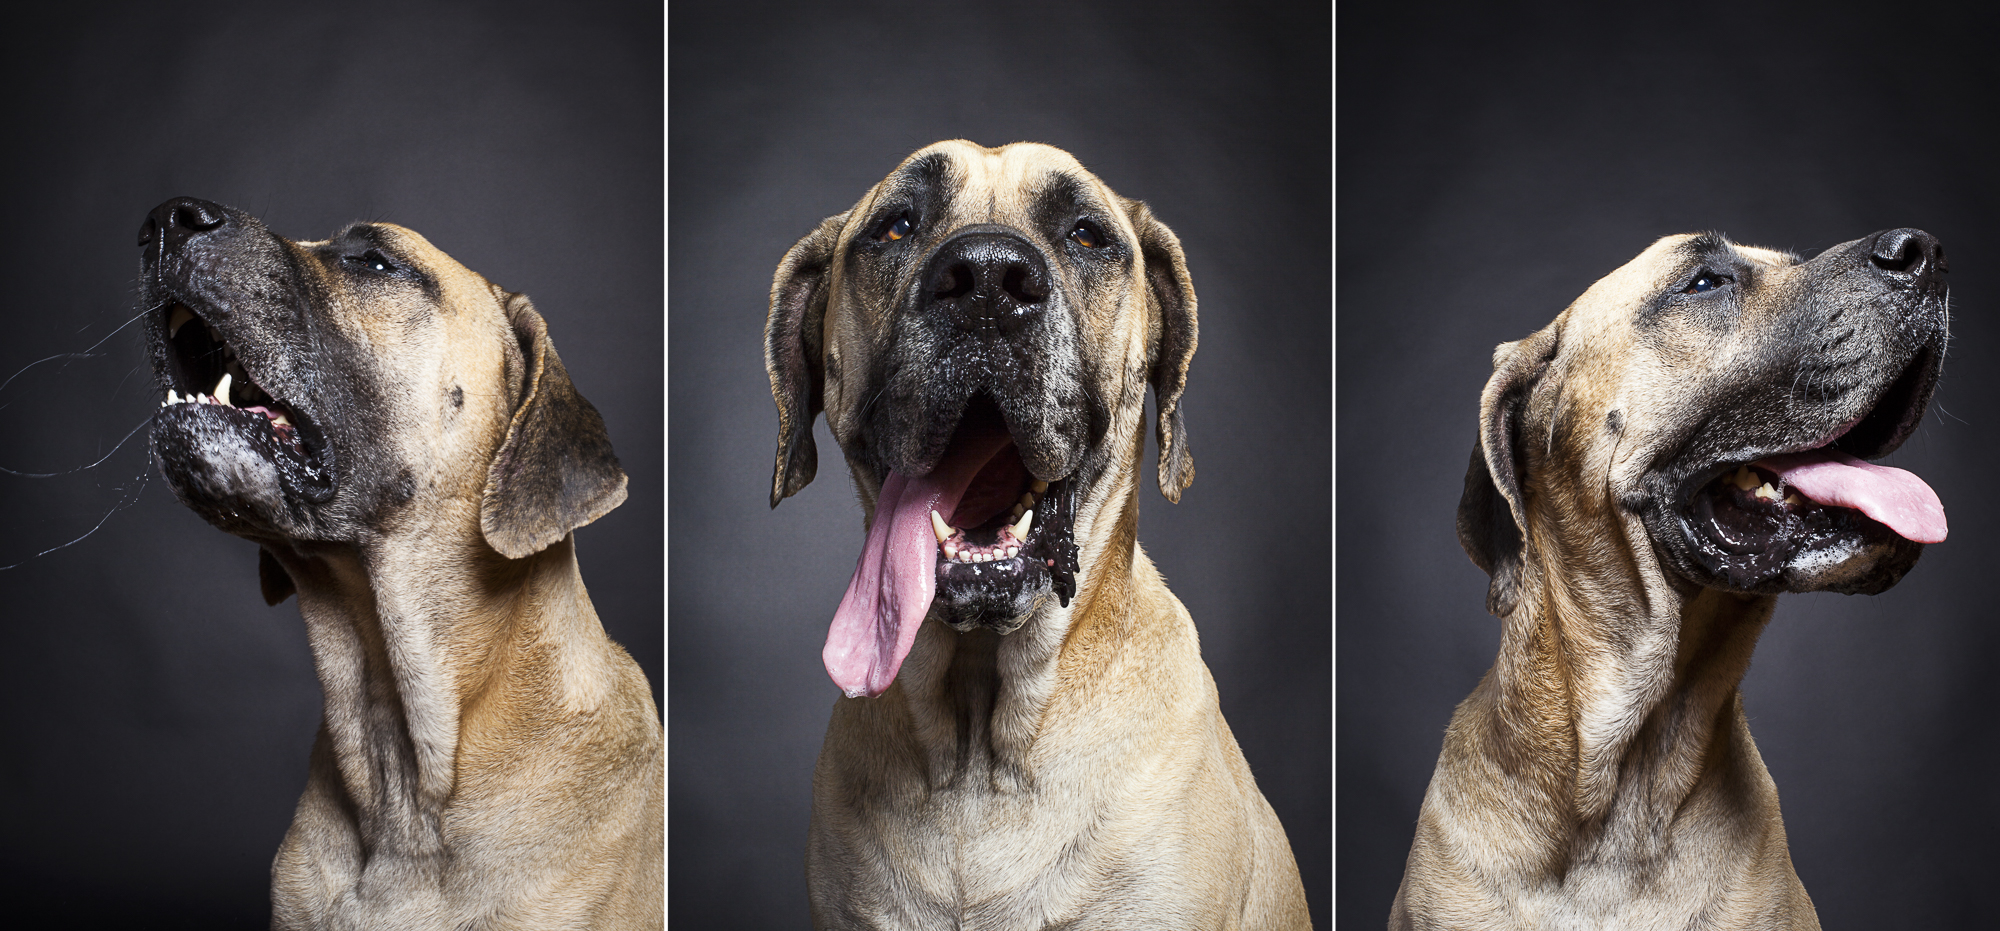 Oliver is a 5 year-old Mastiff/Great Dane mix.  Photographed at Reciprocity Studio in Burlington by Vermont photographer Judd Lamphere